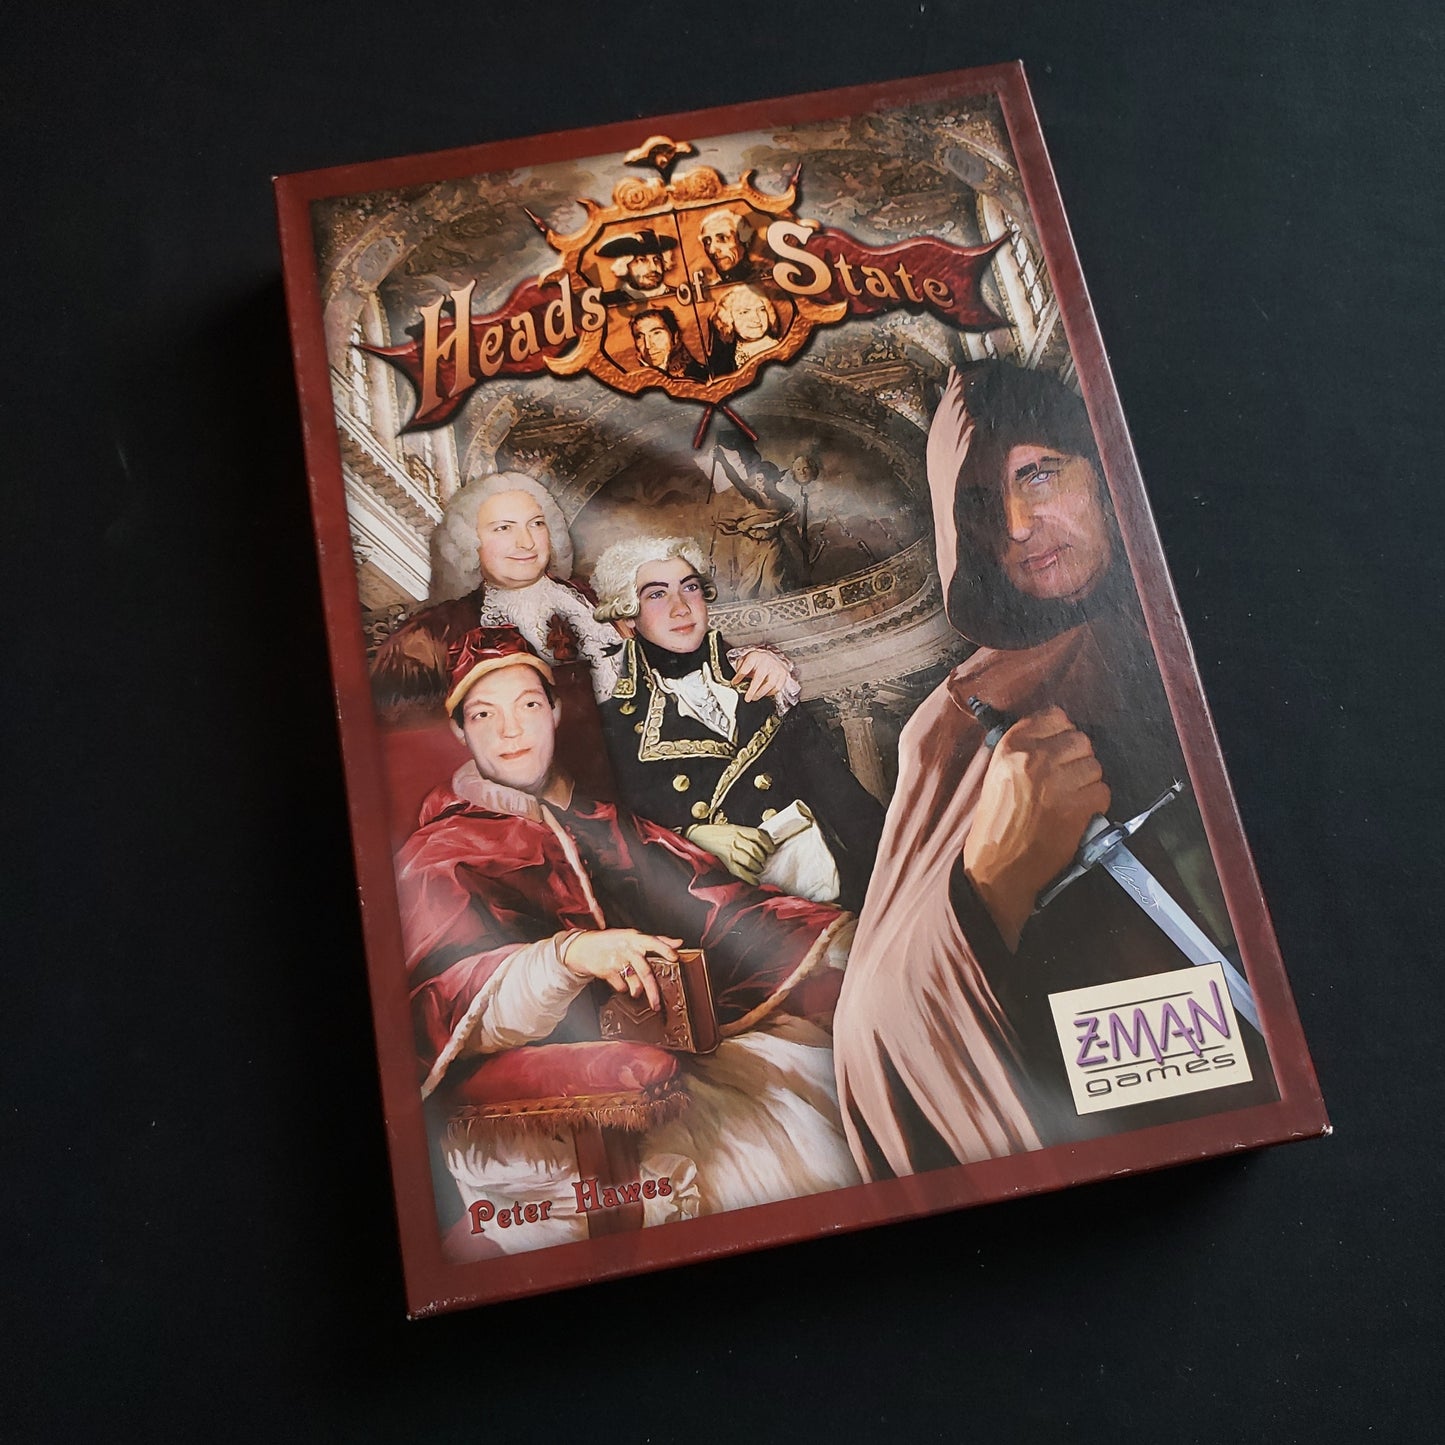 Image shows the front cover of the box of the Heads Of State board game